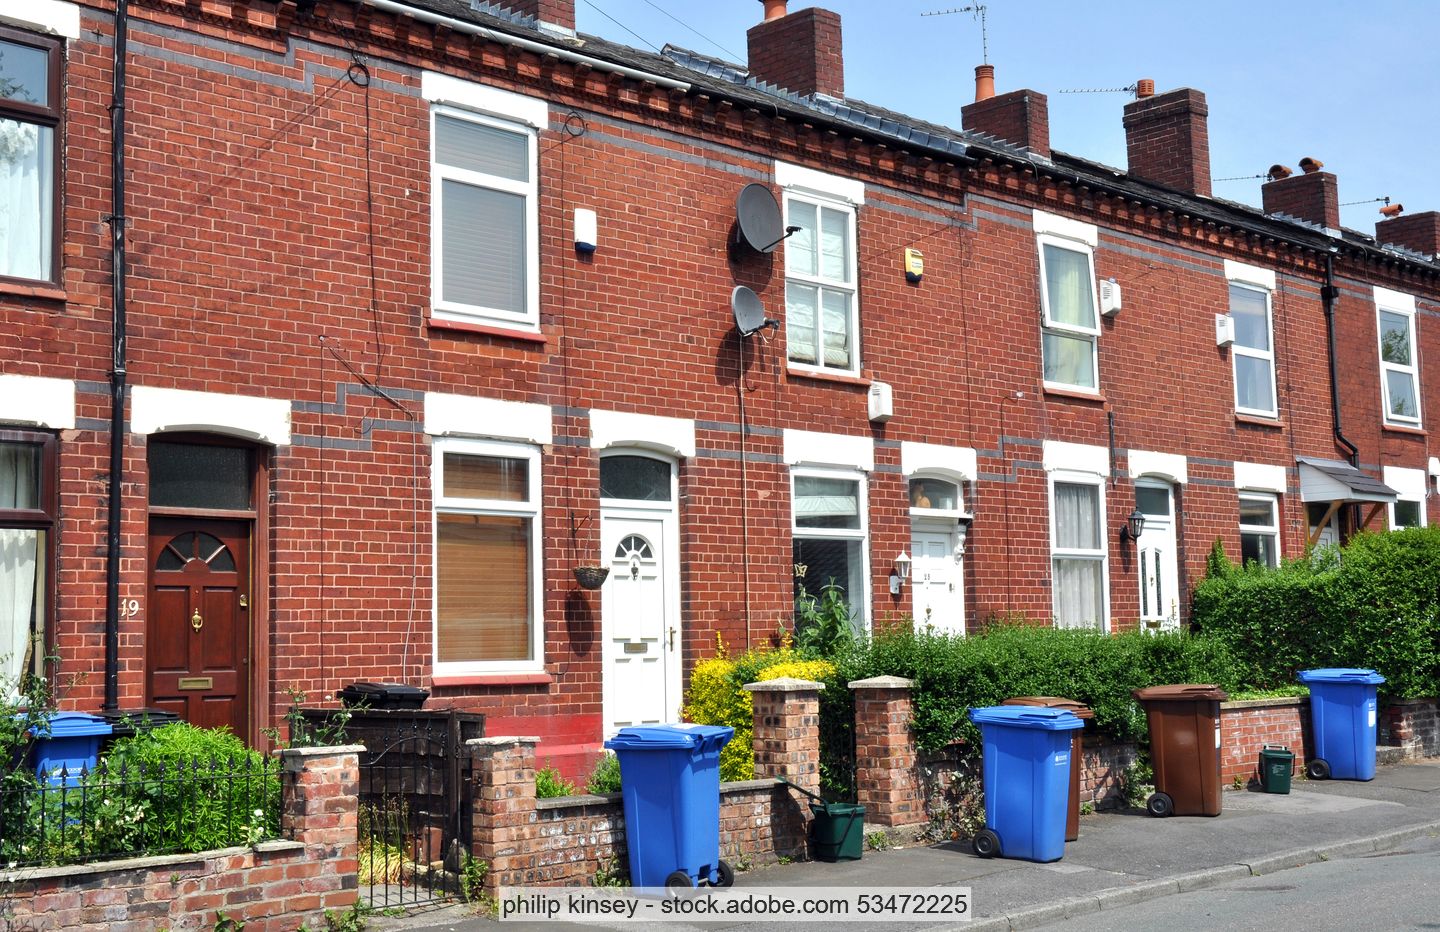 Recycling bins in front of English terraced houses